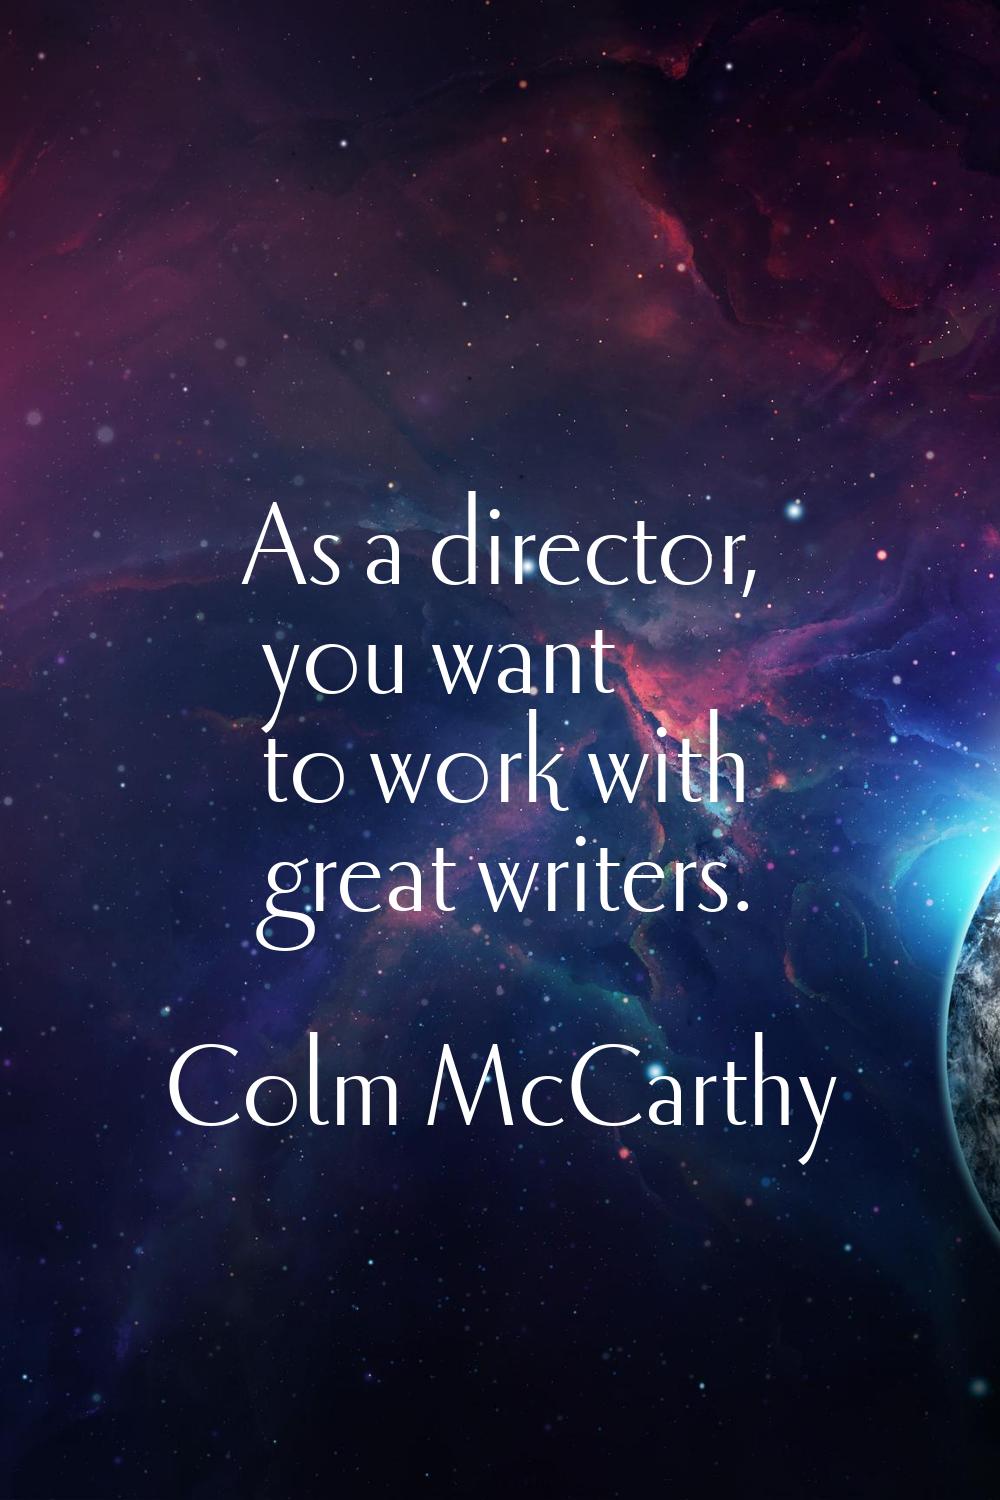 As a director, you want to work with great writers.